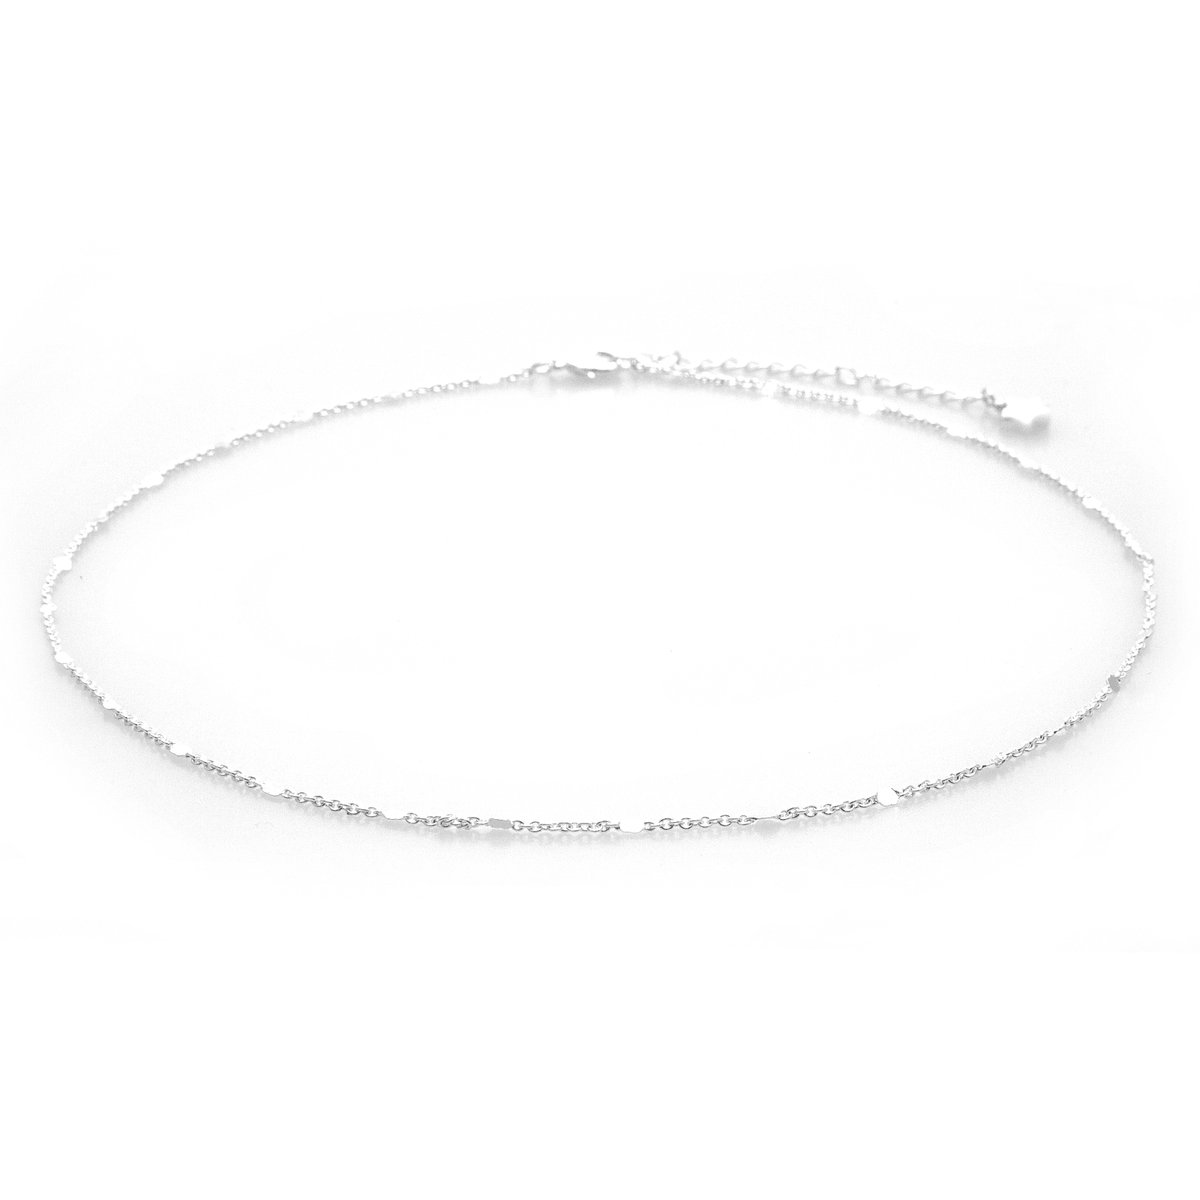 A dainty silver chain necklace